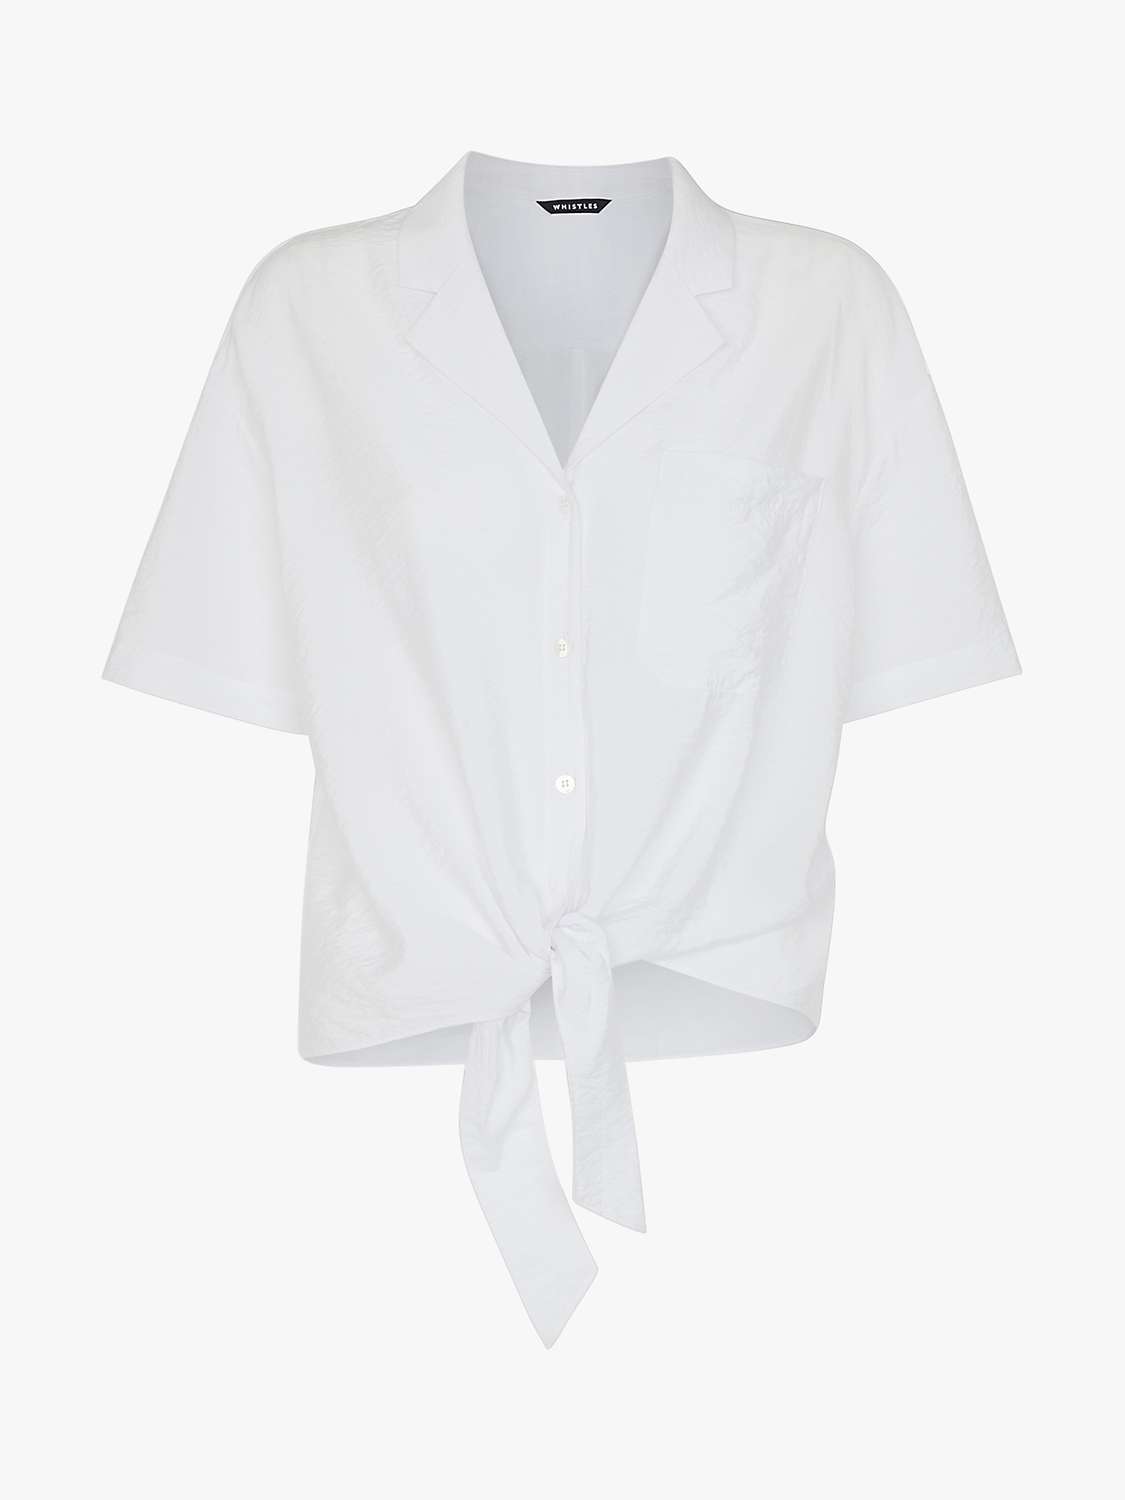 Buy Whistles Nicola Tie Front Top, White Online at johnlewis.com